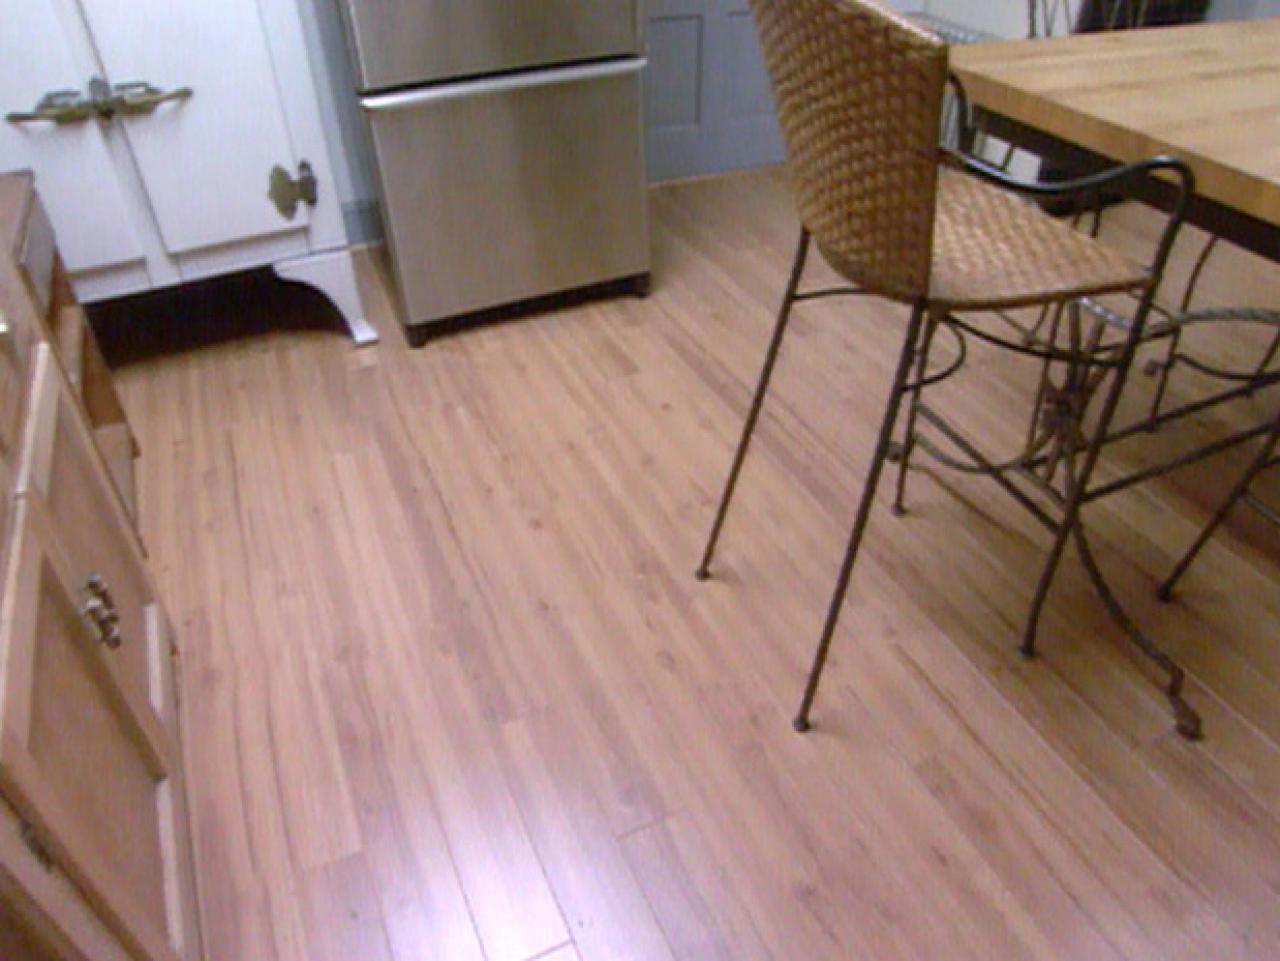 How To Install Laminate Flooring, Which Direction To Lay Vinyl Plank Flooring In Kitchen Cabinets